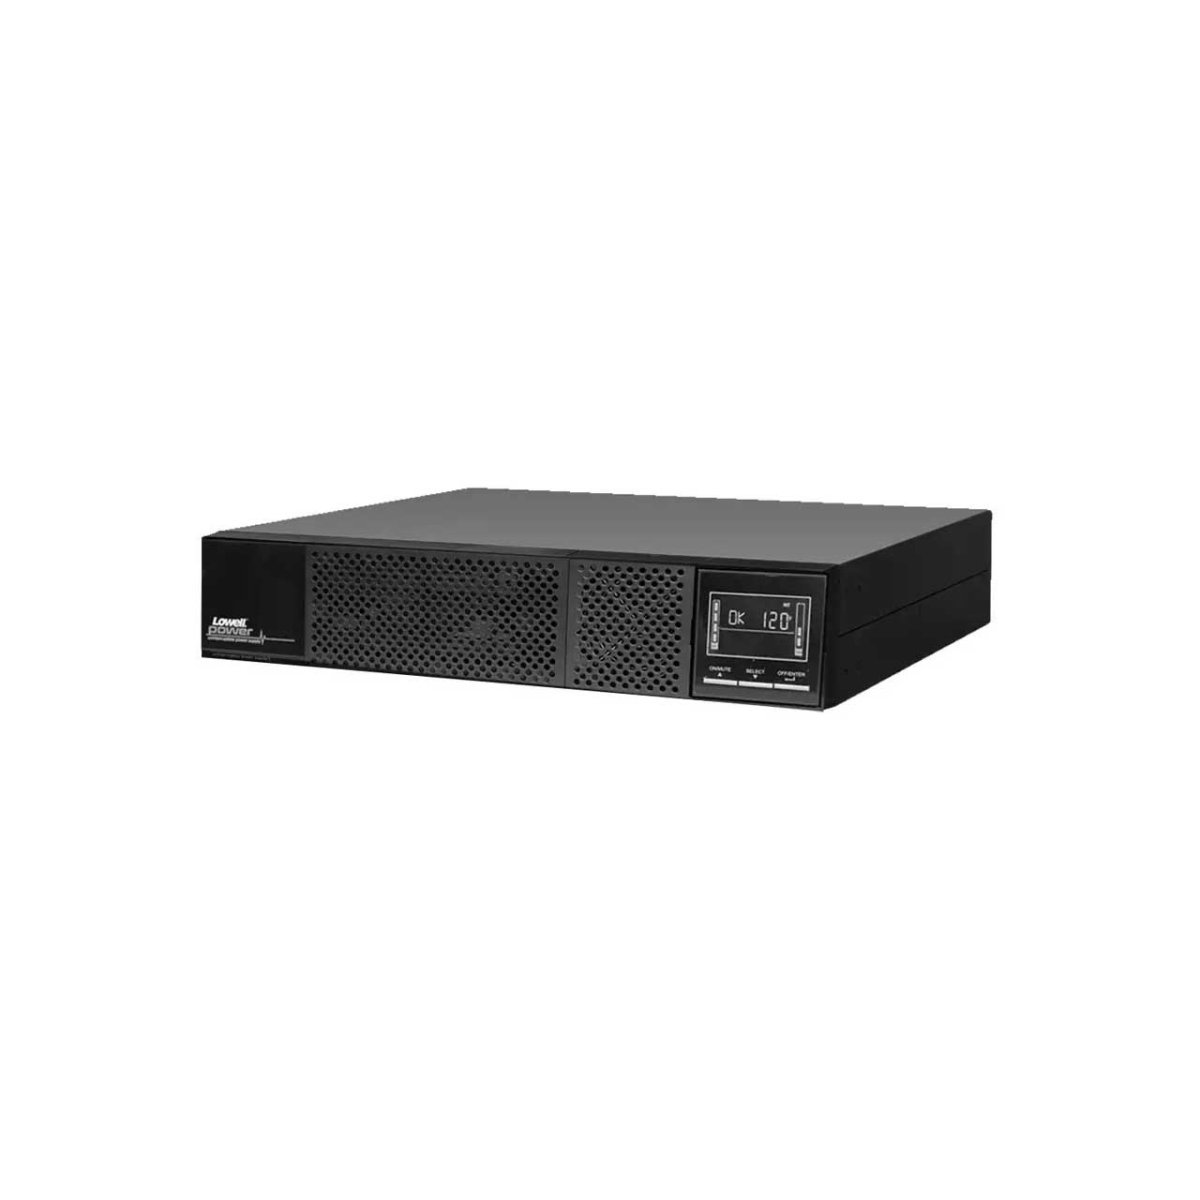 Picture of Lowell Manufacturing LMC-UPS9A-2000IP 2000VA 1930 watt UPS9A-2000-IP Online Power Conditioner - UPS with SNMP Remote Monitoring